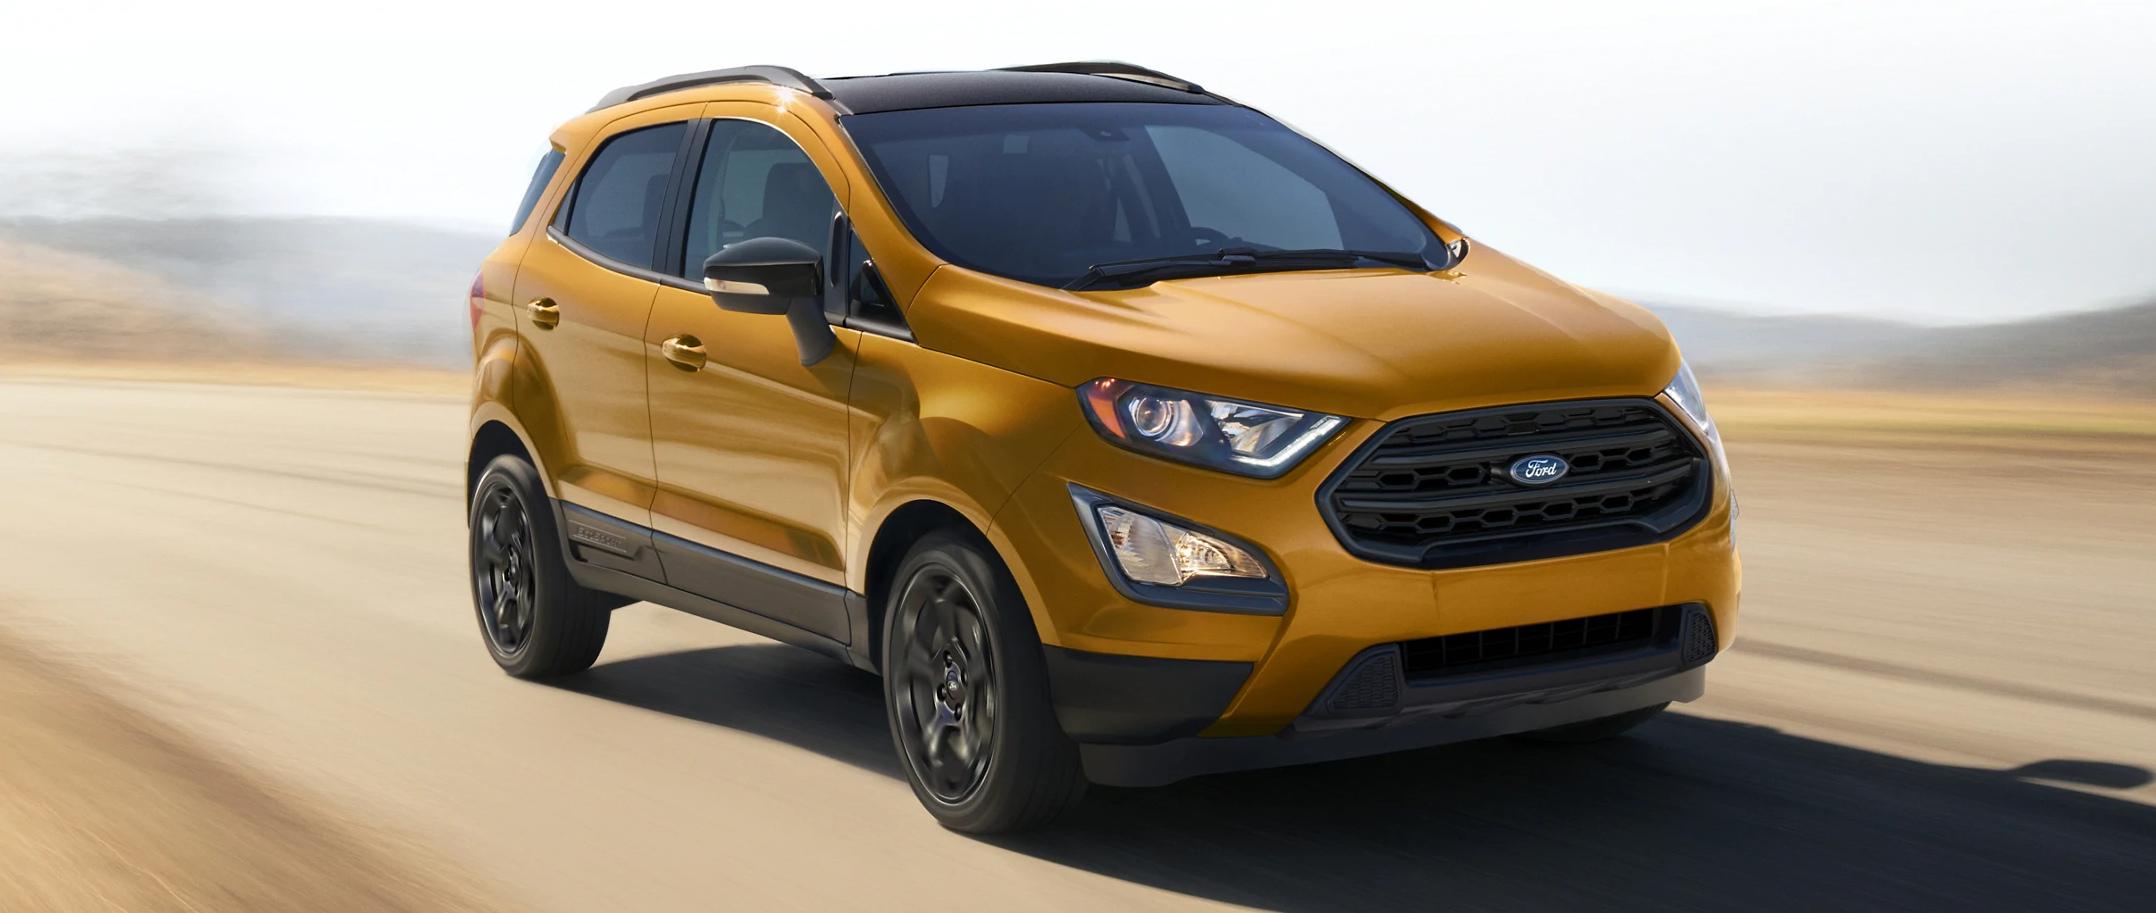 front view of the 2021 Ford Ecosport driving on a track